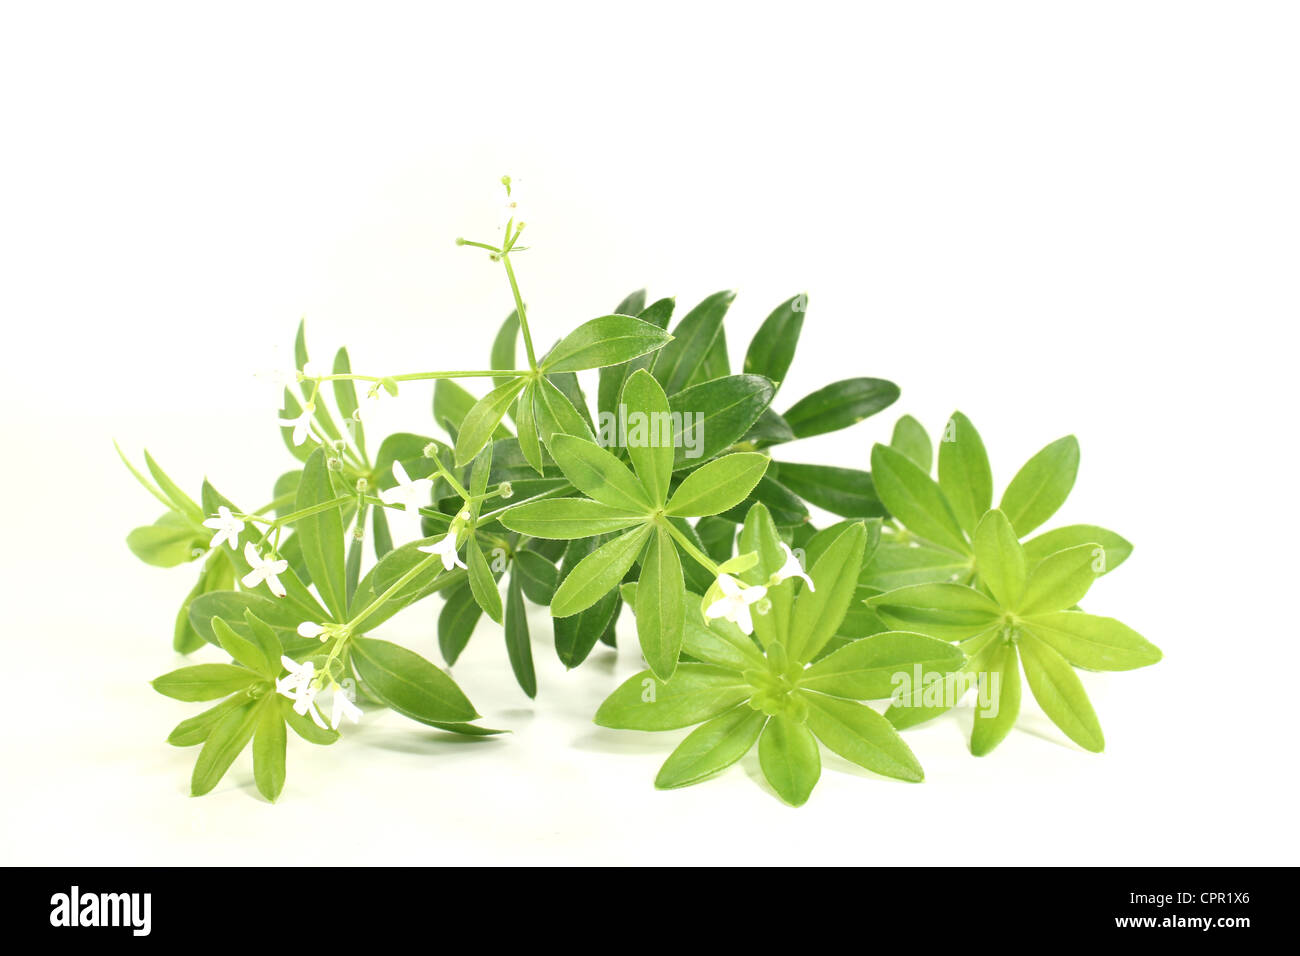 fresh green sweet woodruff with flowers on a bright background Stock Photo